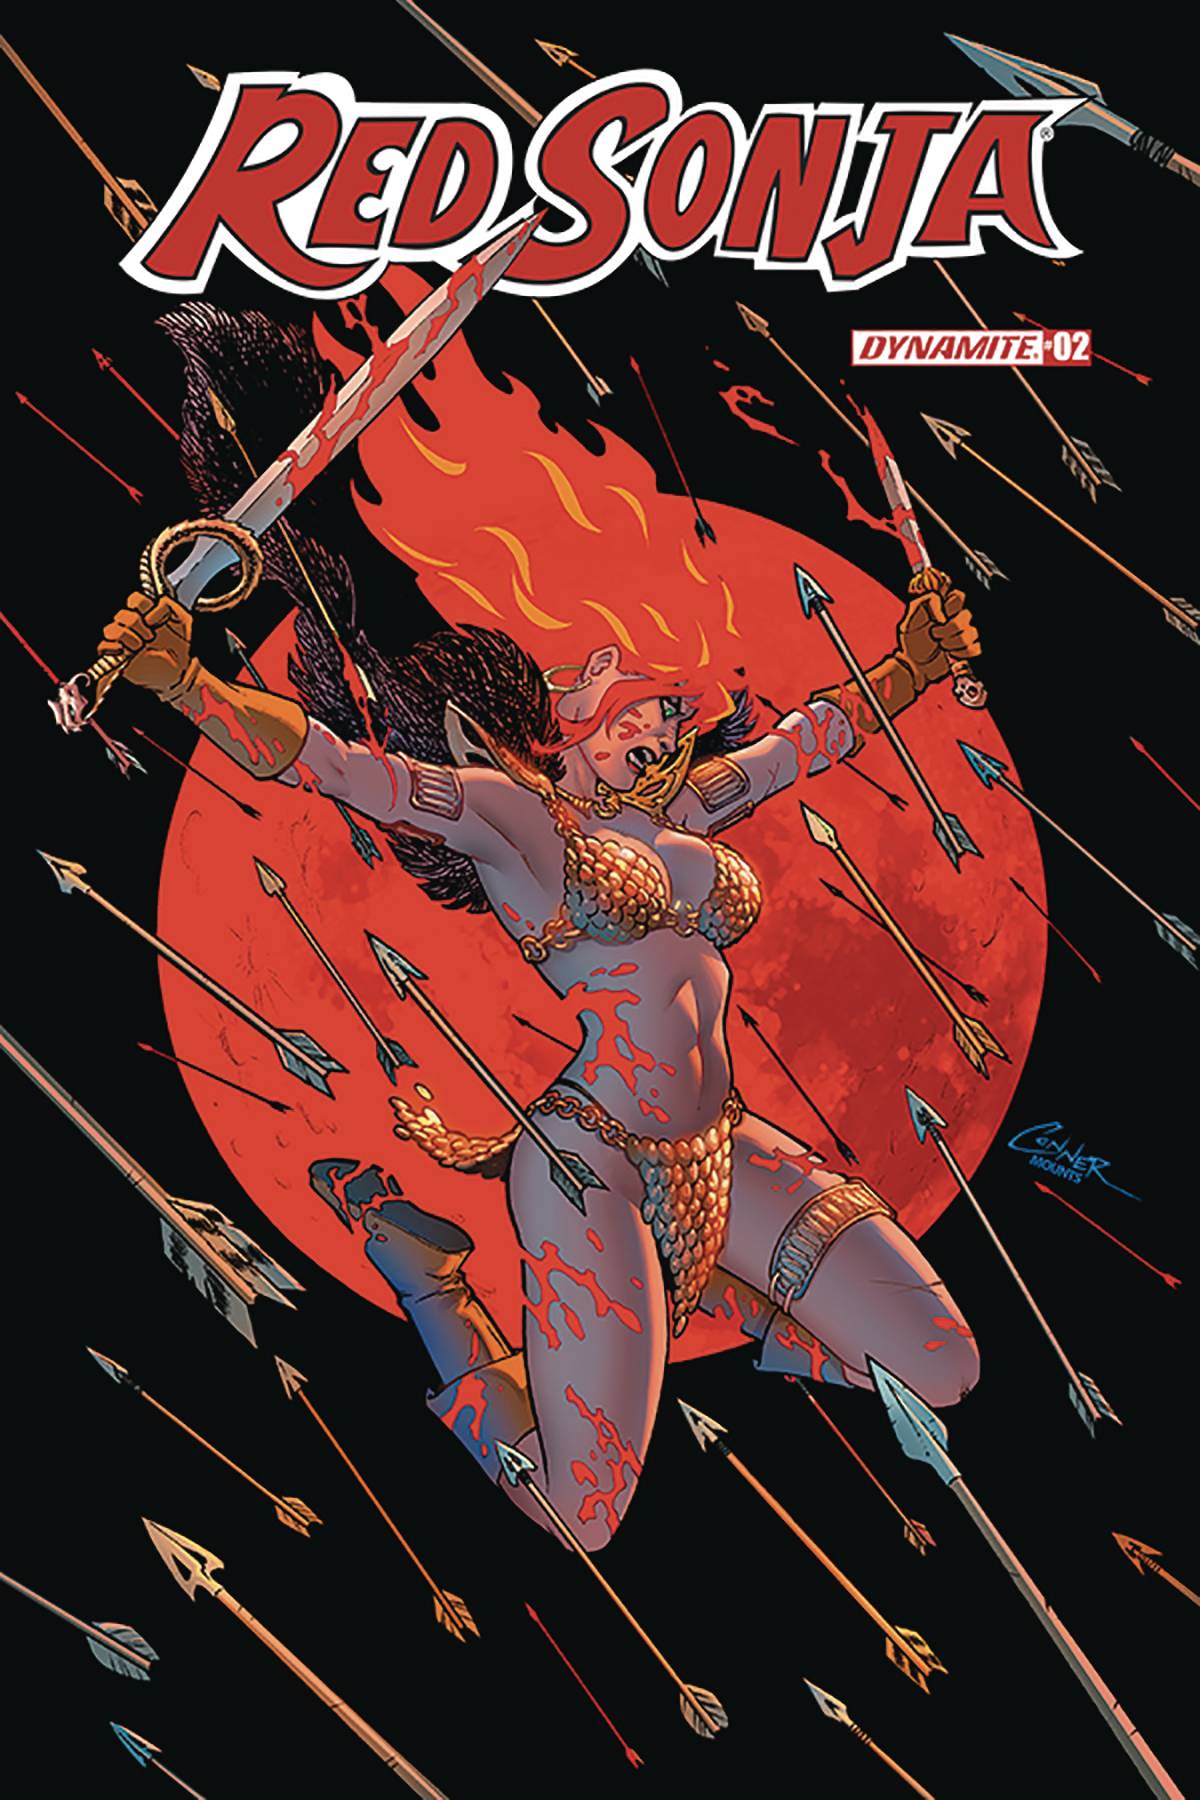 Red Sonja #2 Cover A Conner